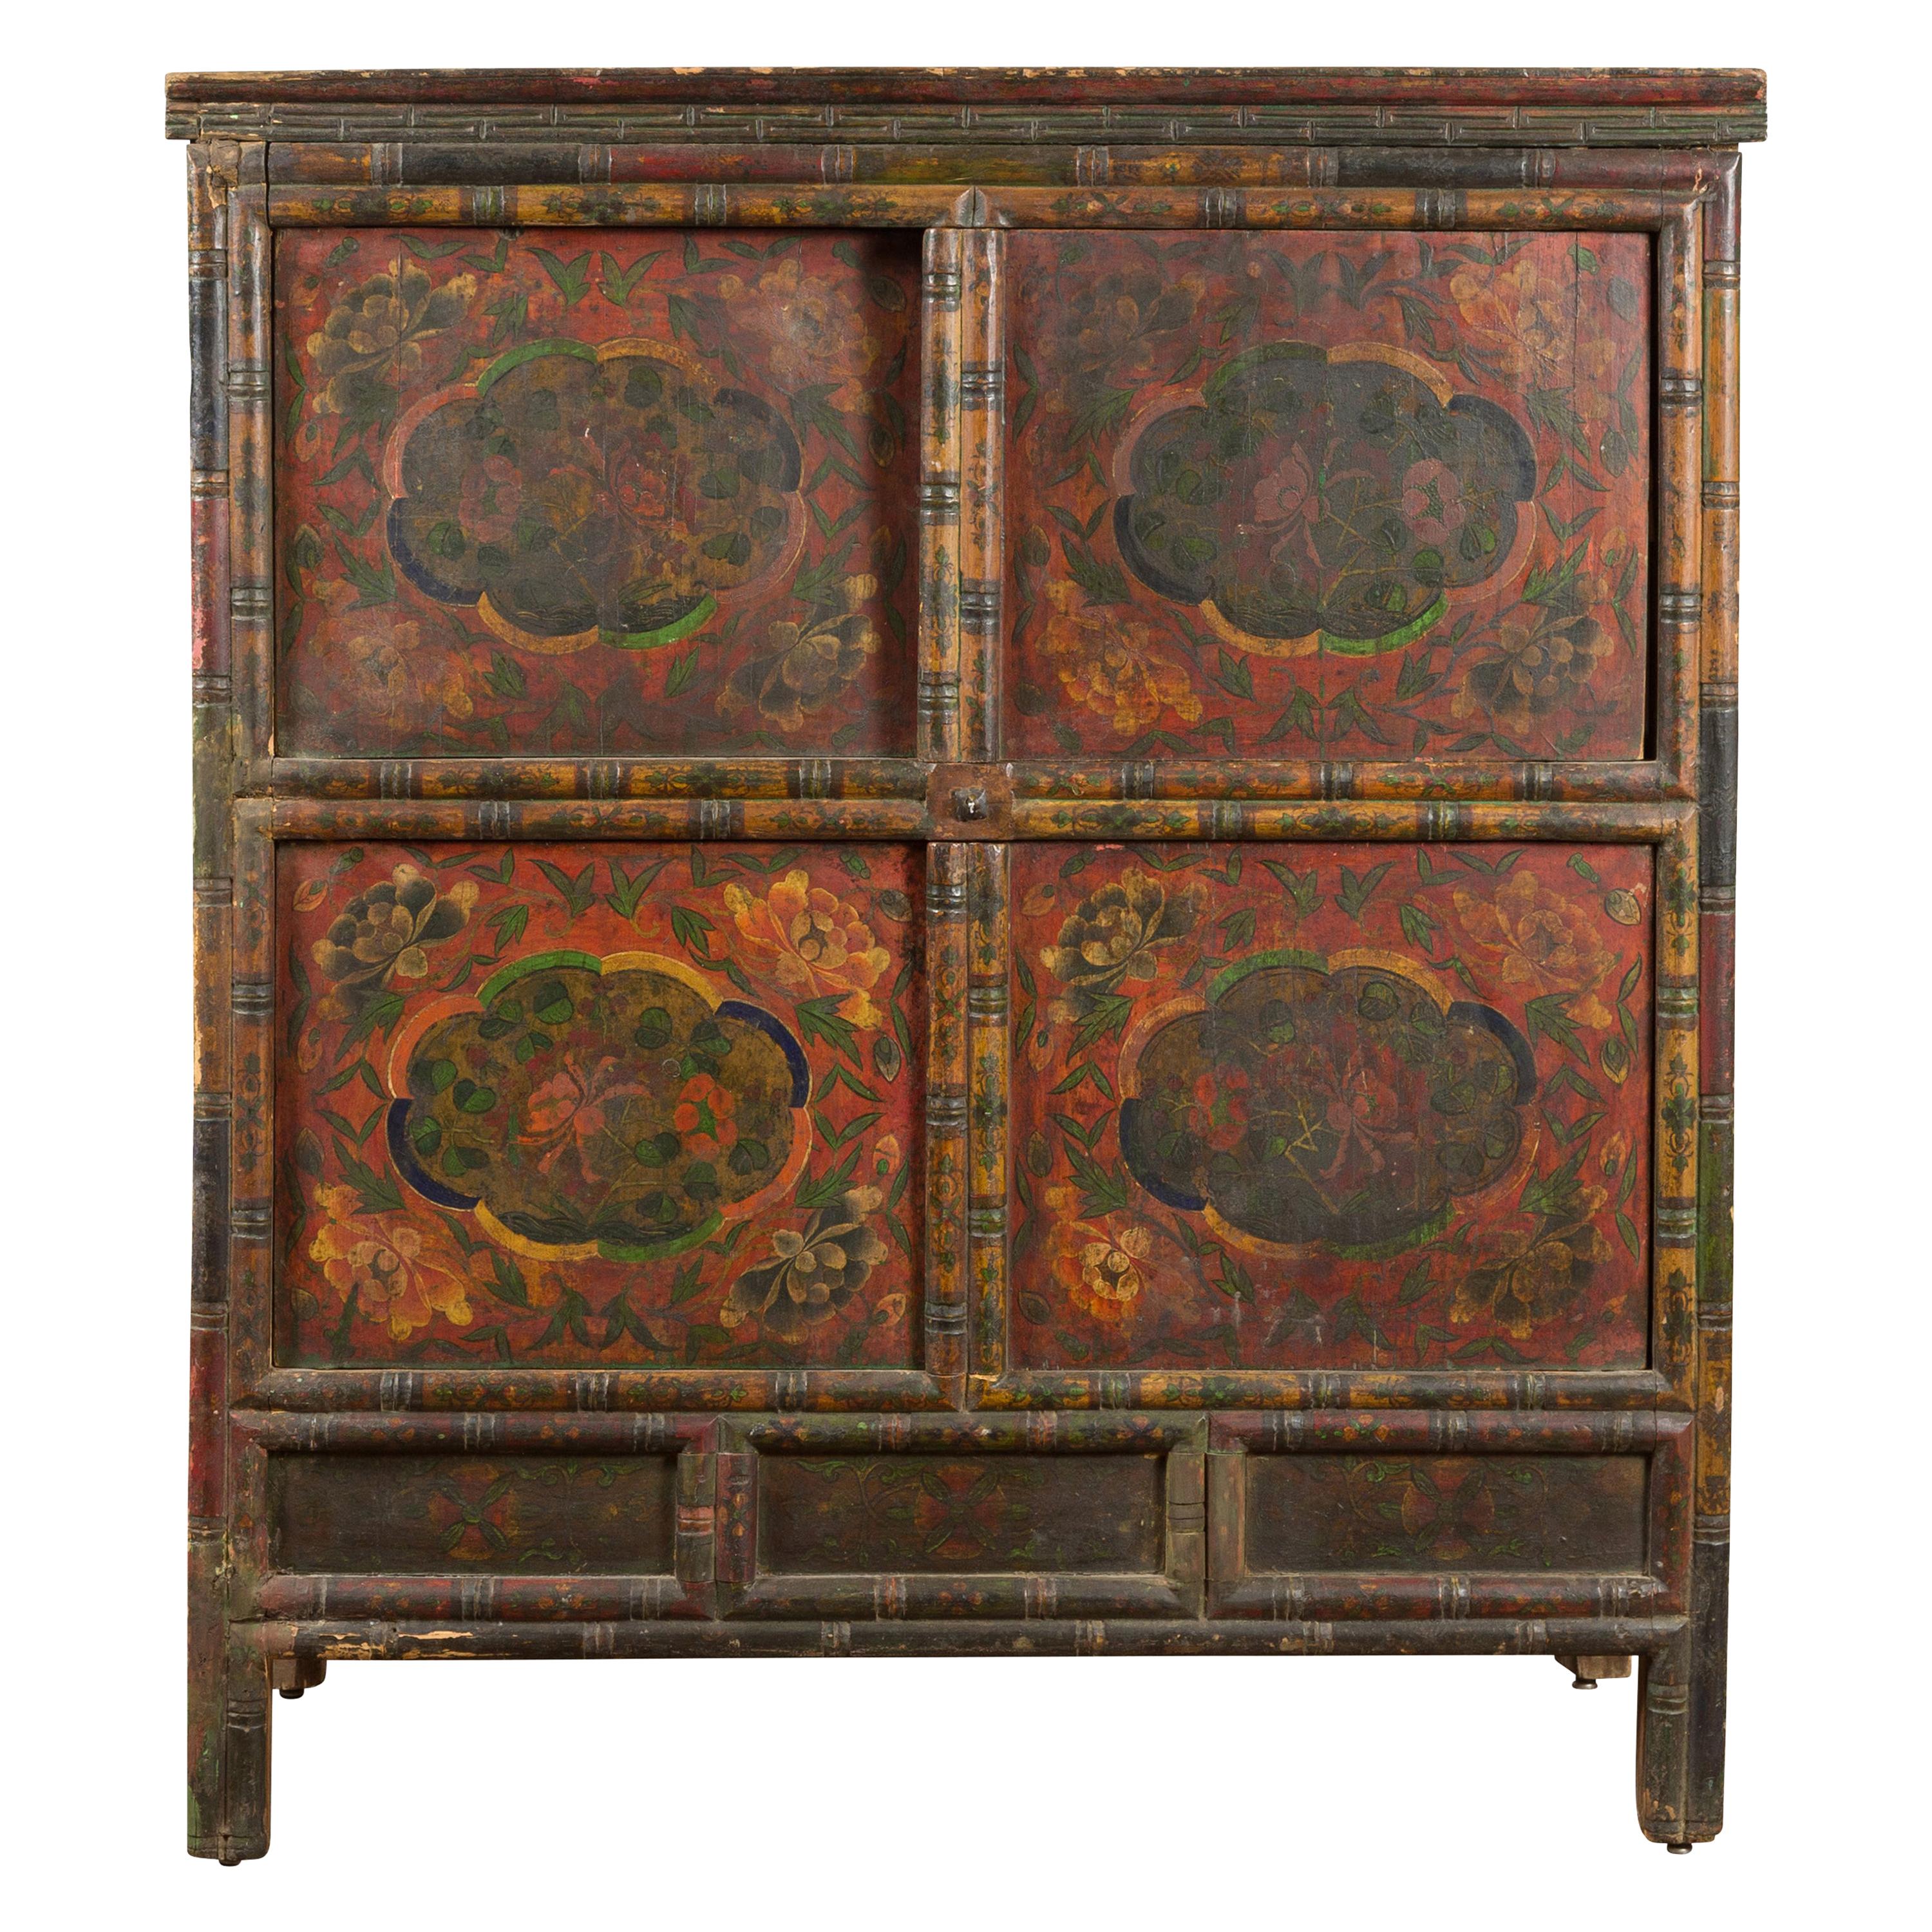 19th Century Polychrome Tibetan Cabinet with Double Doors and Painted Cartouches For Sale